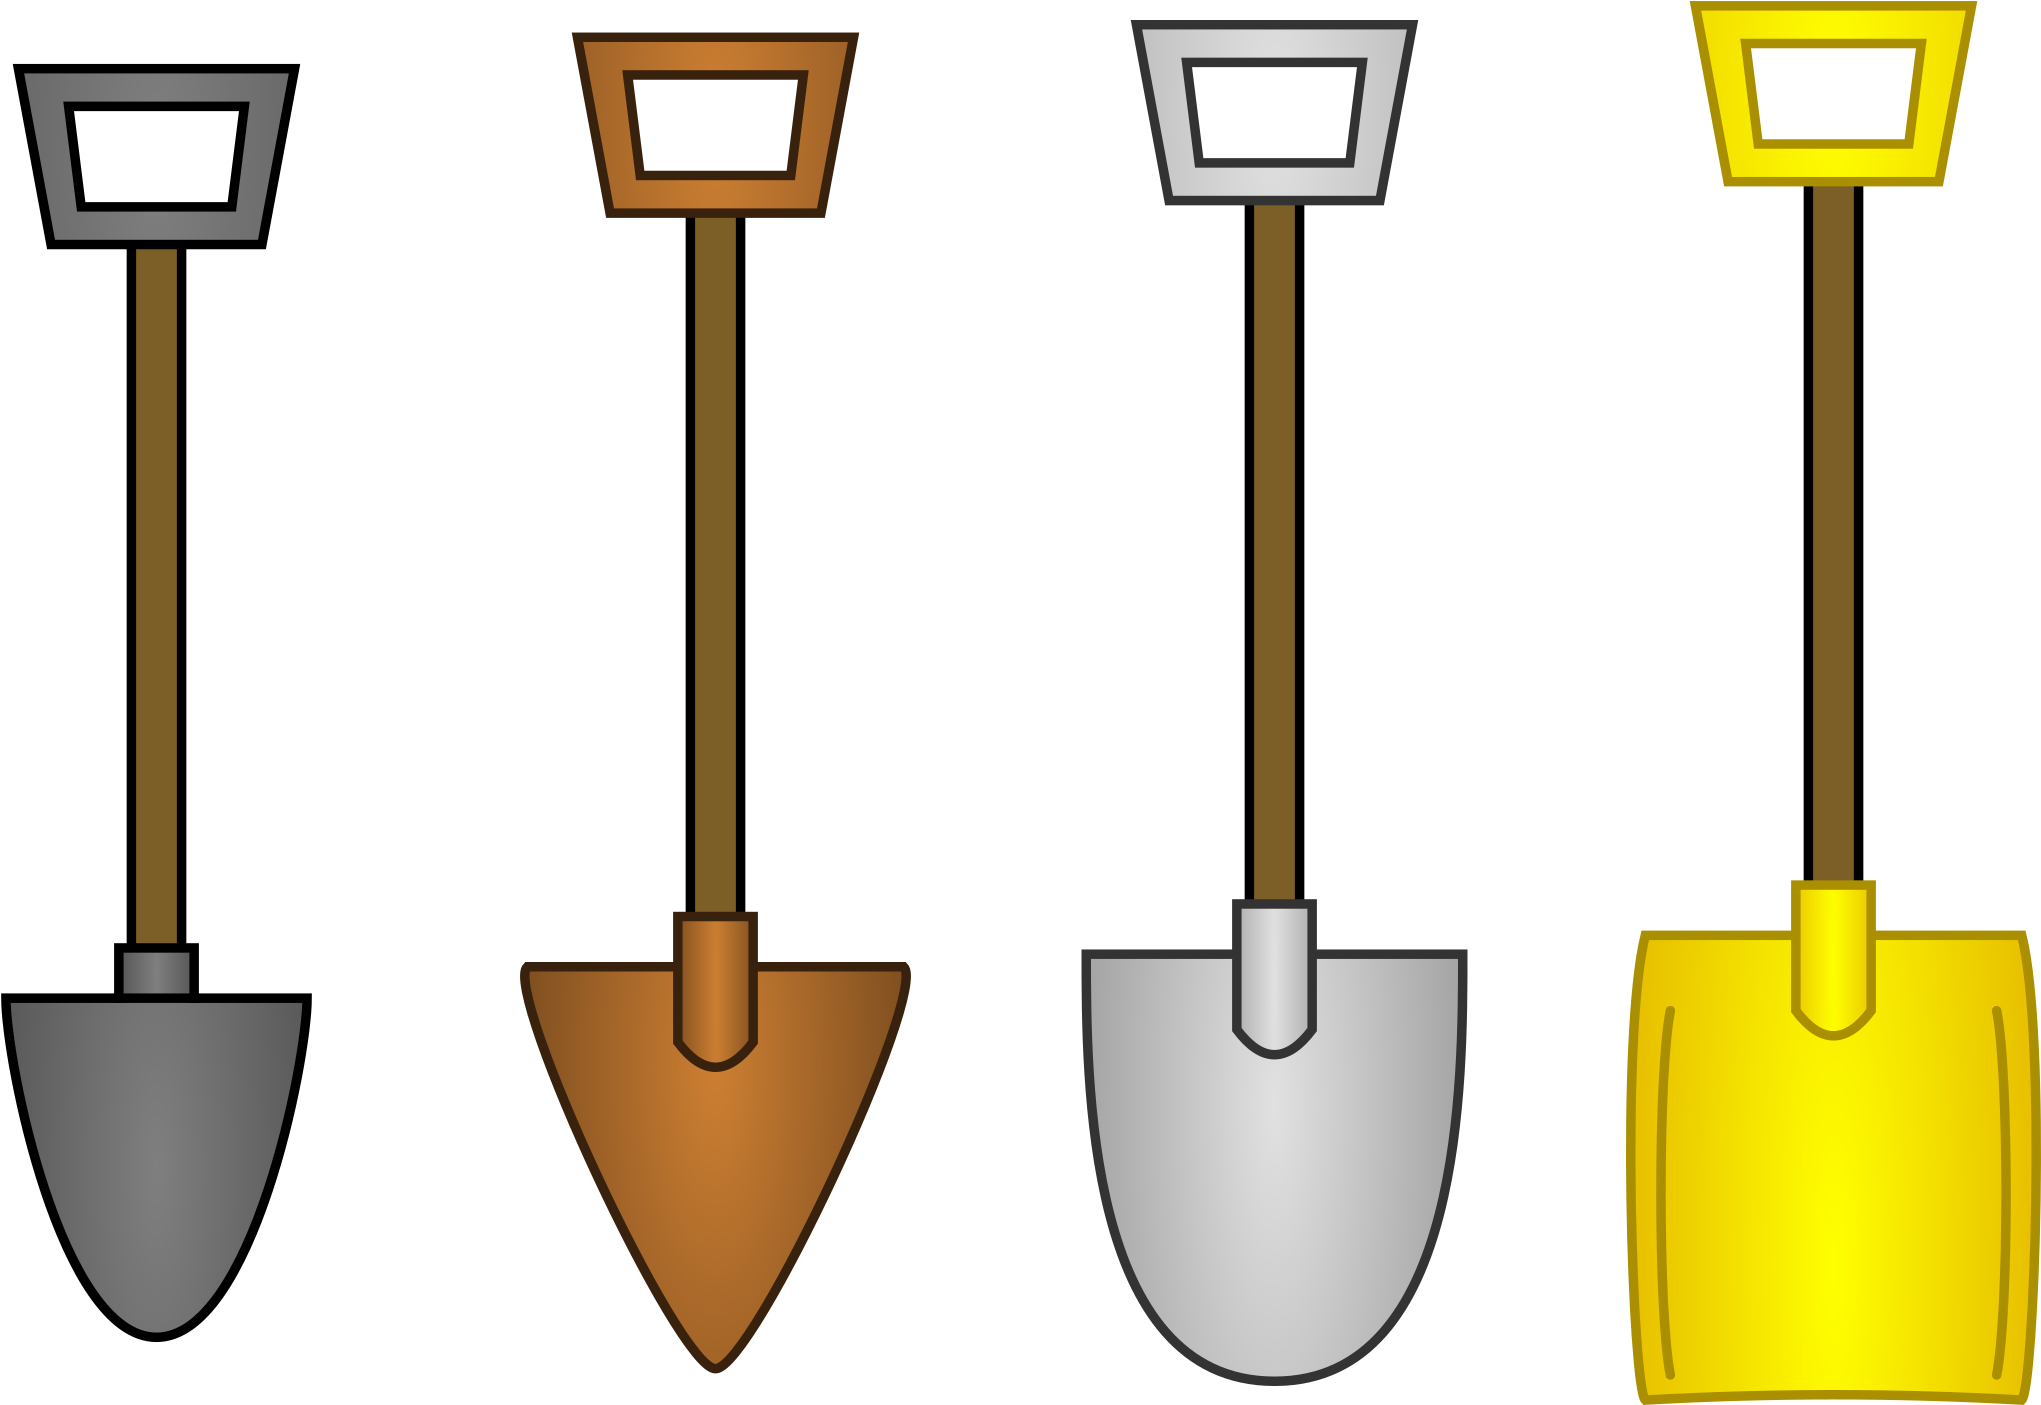 A Group Of Shovels With Different Colors